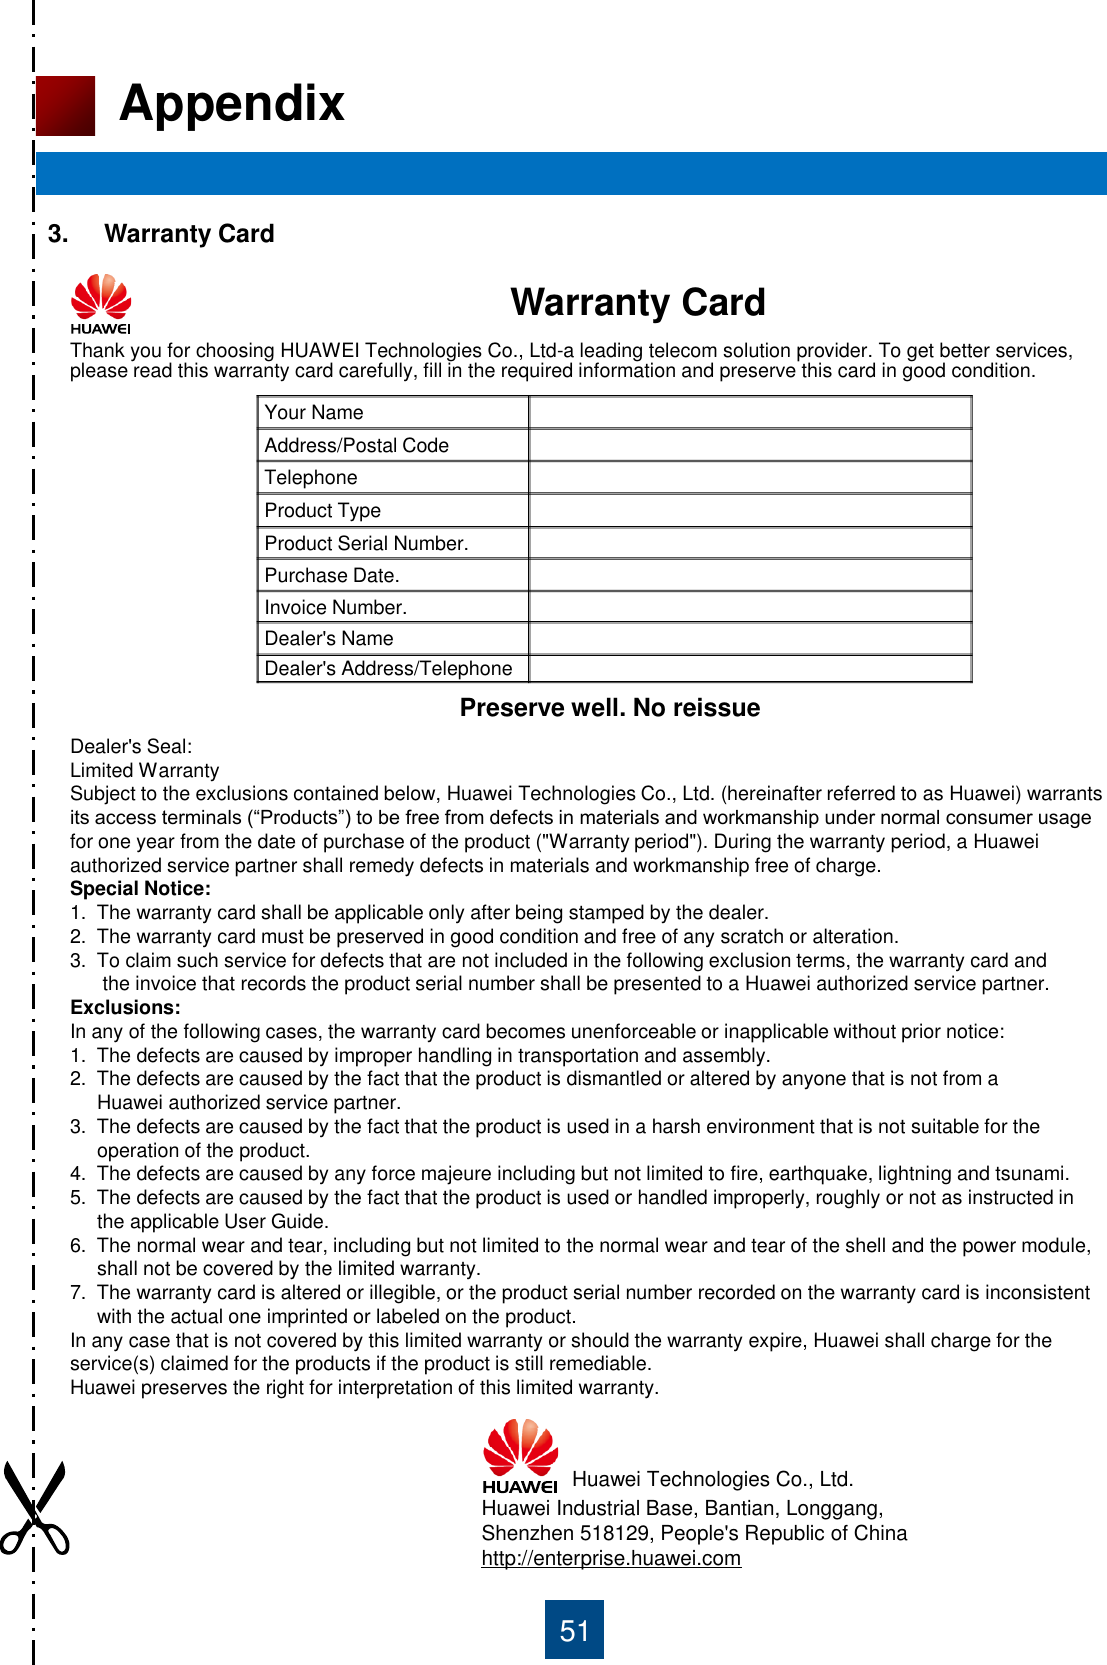 51 Appendix 3. Warranty Card                                              Warranty Card Thank you for choosing HUAWEI Technologies Co., Ltd-a leading telecom solution provider. To get better services, please read this warranty card carefully, fill in the required information and preserve this card in good condition. Dealer&apos;s Seal: Limited Warranty Subject to the exclusions contained below, Huawei Technologies Co., Ltd. (hereinafter referred to as Huawei) warrants its access terminals (“Products”) to be free from defects in materials and workmanship under normal consumer usage for one year from the date of purchase of the product (&quot;Warranty period&quot;). During the warranty period, a Huawei authorized service partner shall remedy defects in materials and workmanship free of charge. Special Notice: 1.  The warranty card shall be applicable only after being stamped by the dealer. 2.  The warranty card must be preserved in good condition and free of any scratch or alteration. 3.  To claim such service for defects that are not included in the following exclusion terms, the warranty card and        the invoice that records the product serial number shall be presented to a Huawei authorized service partner. Exclusions: In any of the following cases, the warranty card becomes unenforceable or inapplicable without prior notice: 1.  The defects are caused by improper handling in transportation and assembly. 2.  The defects are caused by the fact that the product is dismantled or altered by anyone that is not from a      Huawei authorized service partner. 3.  The defects are caused by the fact that the product is used in a harsh environment that is not suitable for the       operation of the product. 4.  The defects are caused by any force majeure including but not limited to fire, earthquake, lightning and tsunami. 5.  The defects are caused by the fact that the product is used or handled improperly, roughly or not as instructed in       the applicable User Guide. 6.  The normal wear and tear, including but not limited to the normal wear and tear of the shell and the power module,      shall not be covered by the limited warranty. 7.  The warranty card is altered or illegible, or the product serial number recorded on the warranty card is inconsistent       with the actual one imprinted or labeled on the product. In any case that is not covered by this limited warranty or should the warranty expire, Huawei shall charge for the service(s) claimed for the products if the product is still remediable.  Huawei preserves the right for interpretation of this limited warranty. Huawei Technologies Co., Ltd. Huawei Industrial Base, Bantian, Longgang, Shenzhen 518129, People&apos;s Republic of China http://enterprise.huawei.com Your Name Address/Postal Code Telephone Product Type Product Serial Number. Purchase Date. Invoice Number. Dealer&apos;s Name Dealer&apos;s Address/Telephone Preserve well. No reissue 